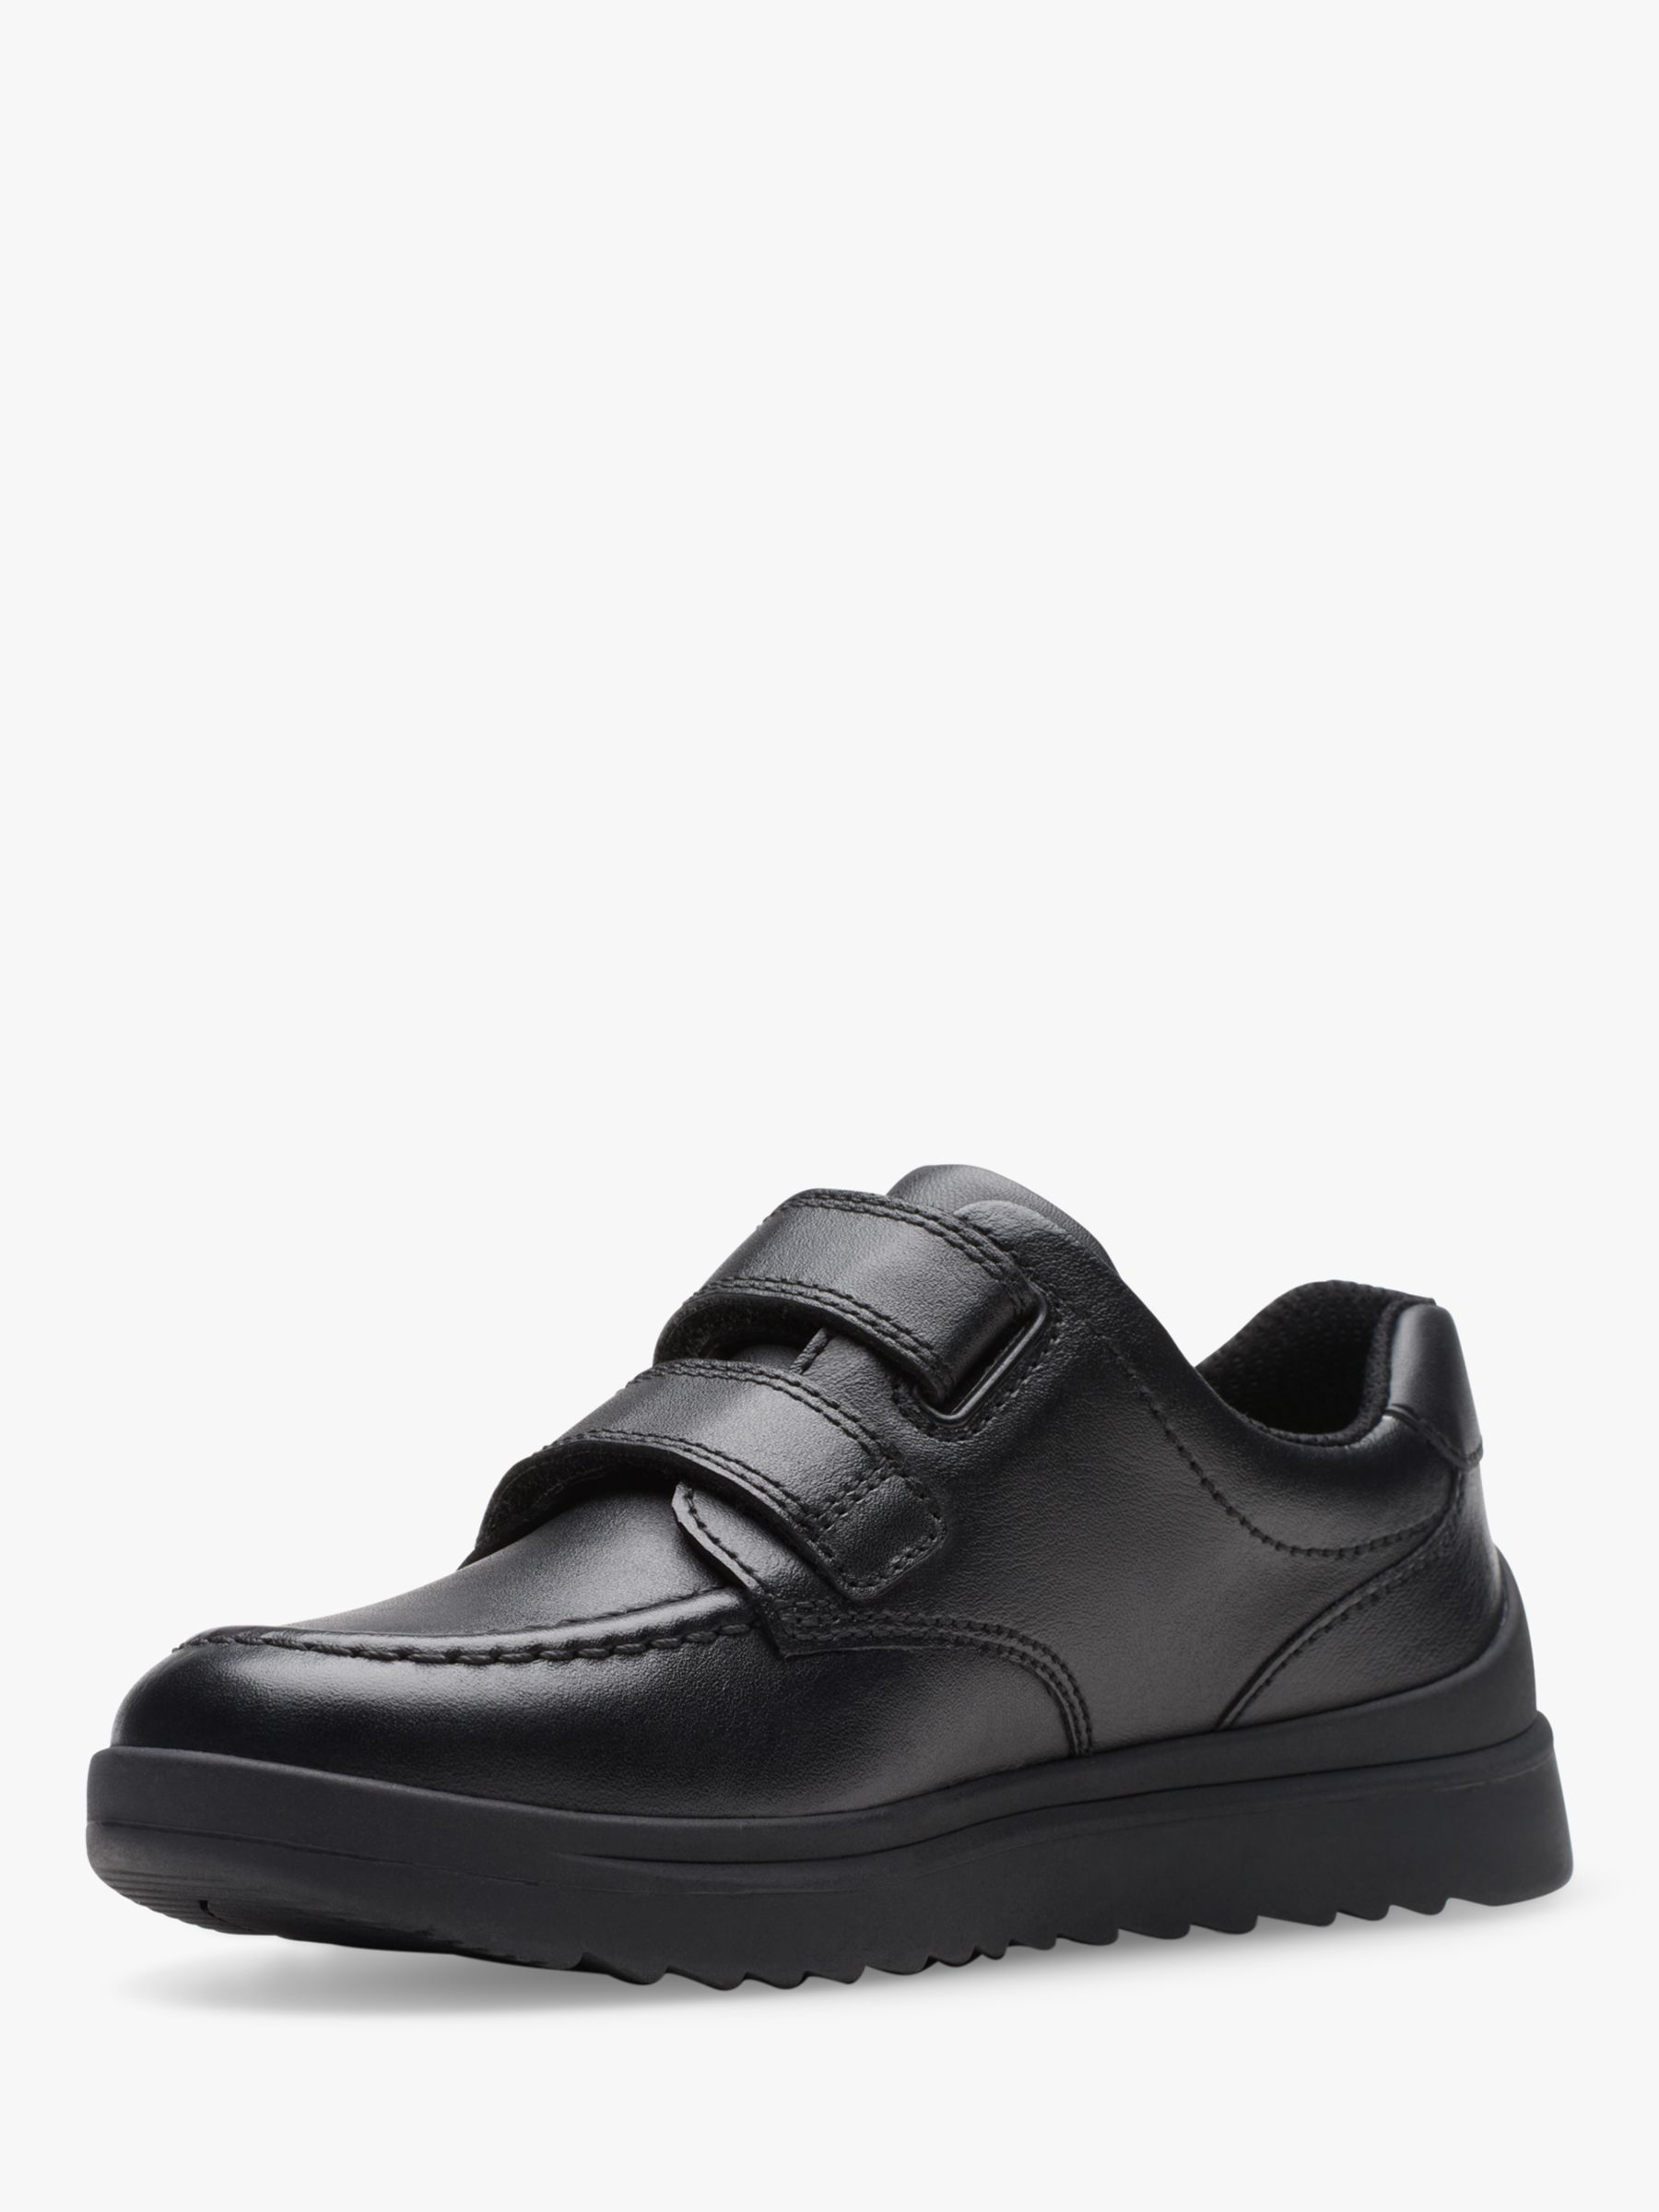 Buy Clarks Kids' Goal Style School Shoes Online at johnlewis.com